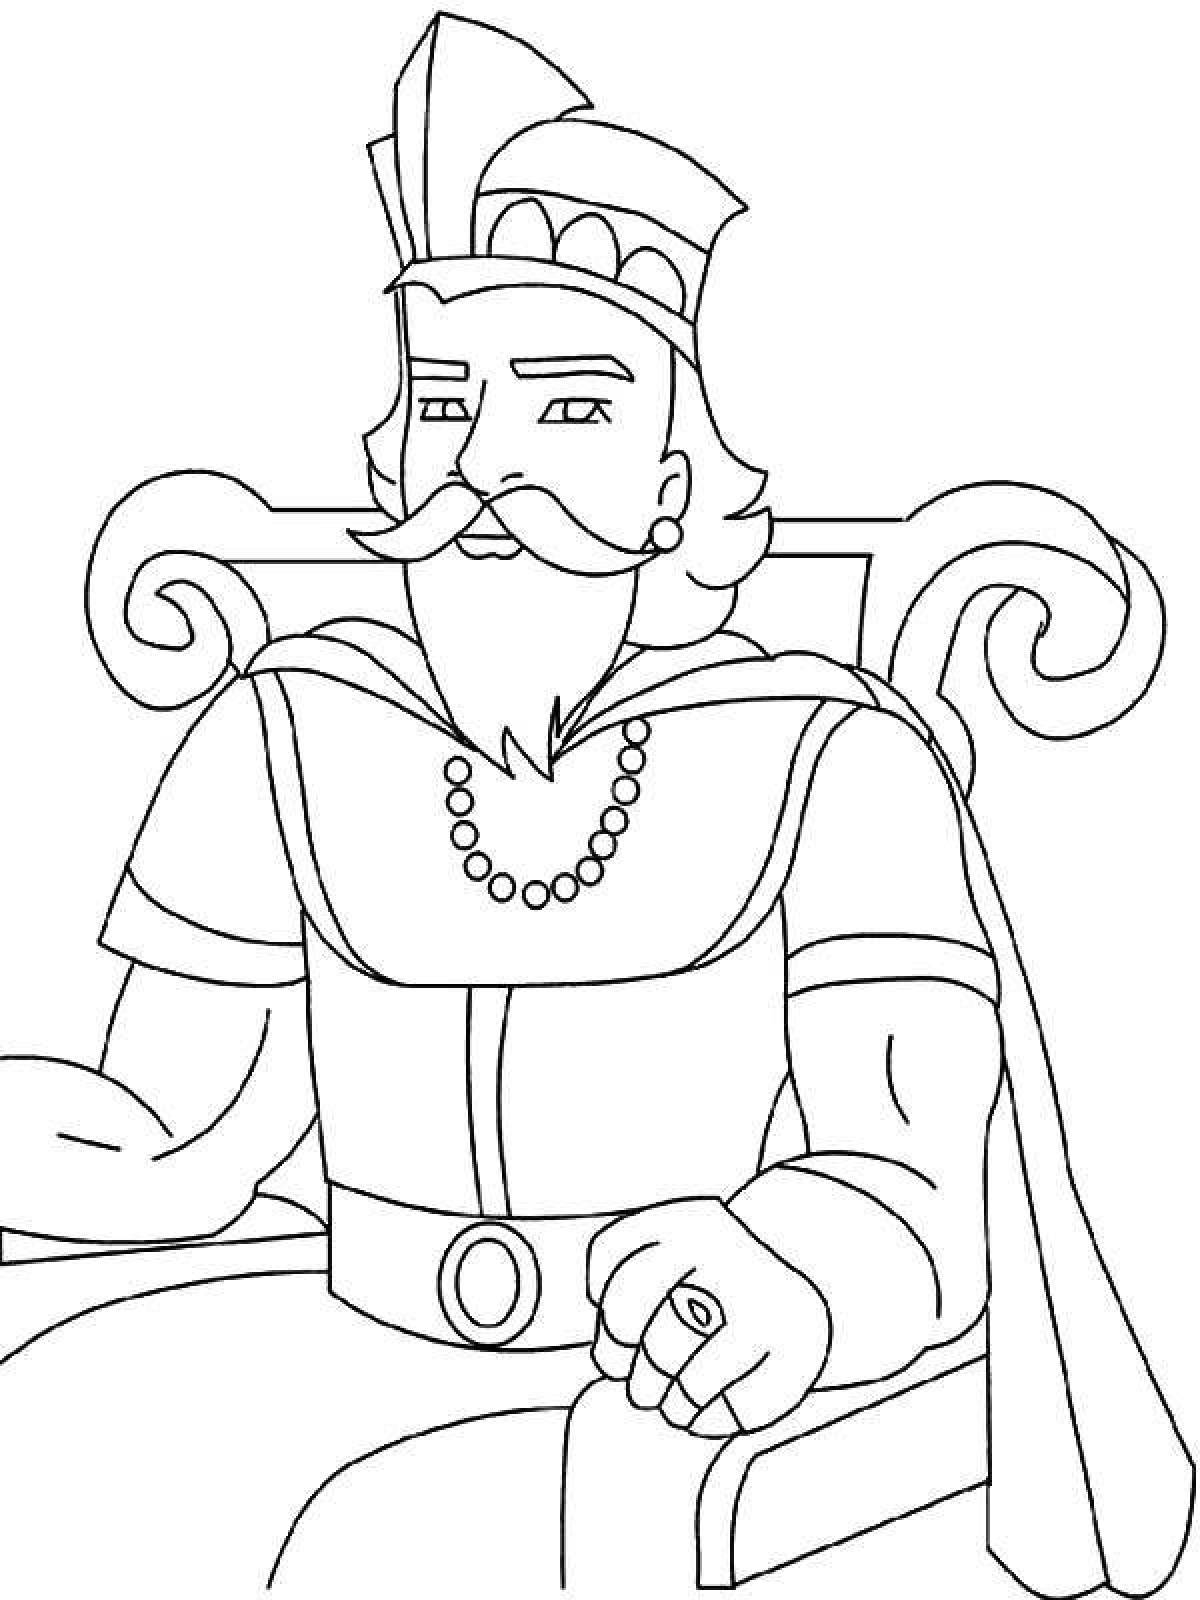 Radiant coloring page king